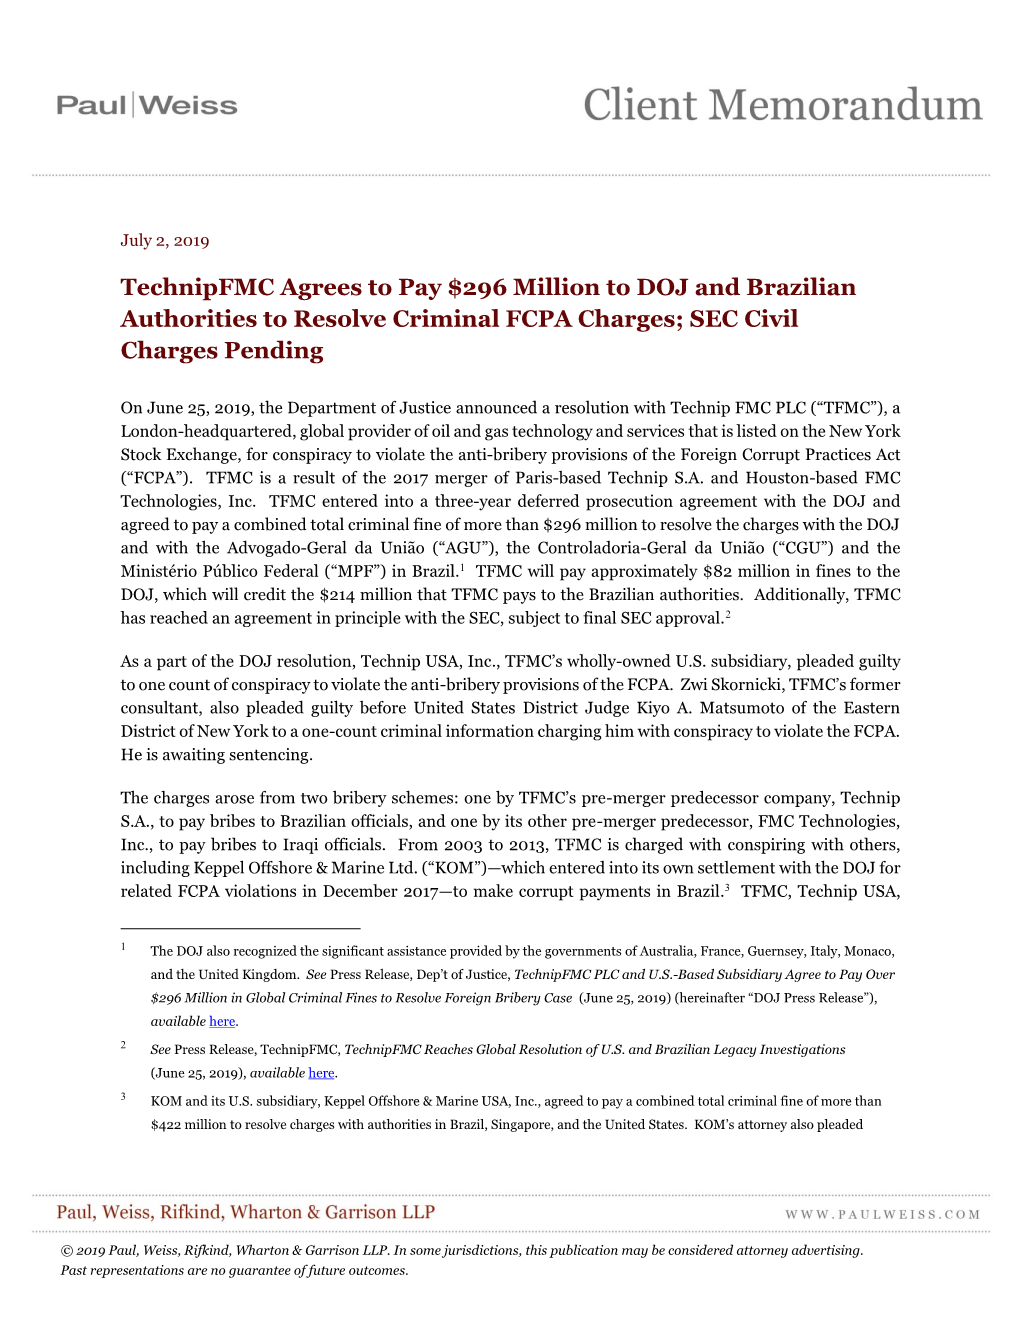 Technipfmc Agrees to Pay $296 Million to DOJ and Brazilian Authorities to Resolve Criminal FCPA Charges; SEC Civil Charges Pending